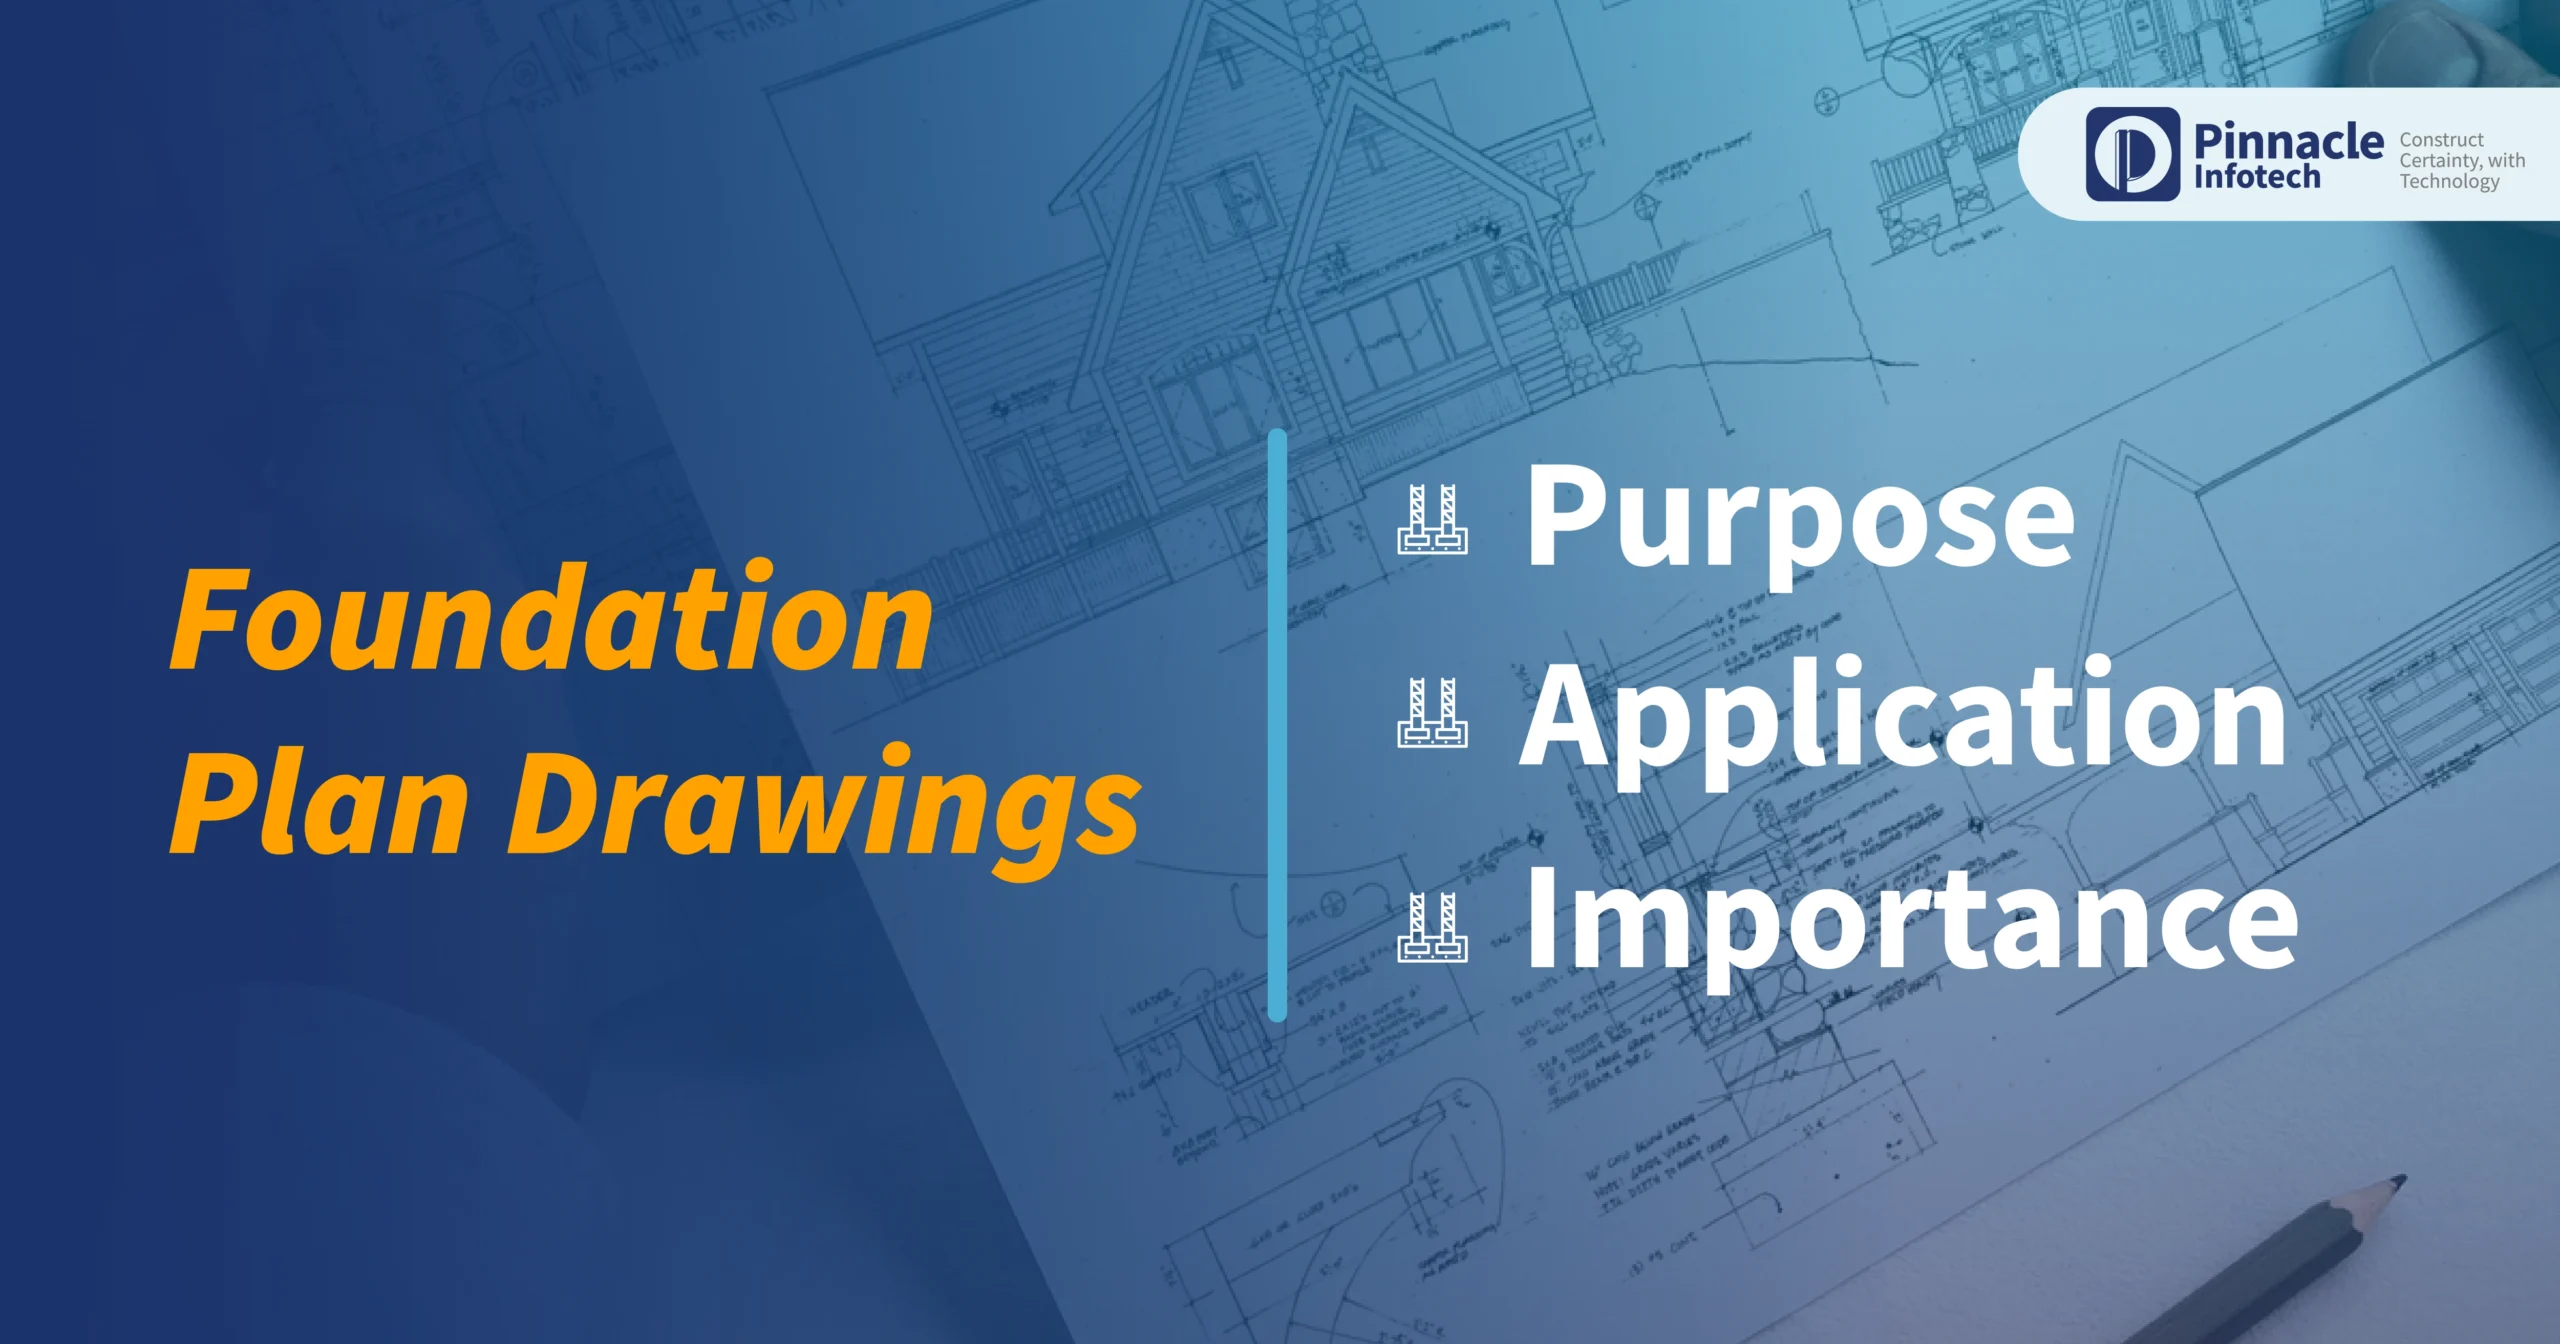 Foundation Plans: Purpose, Application, and Importance